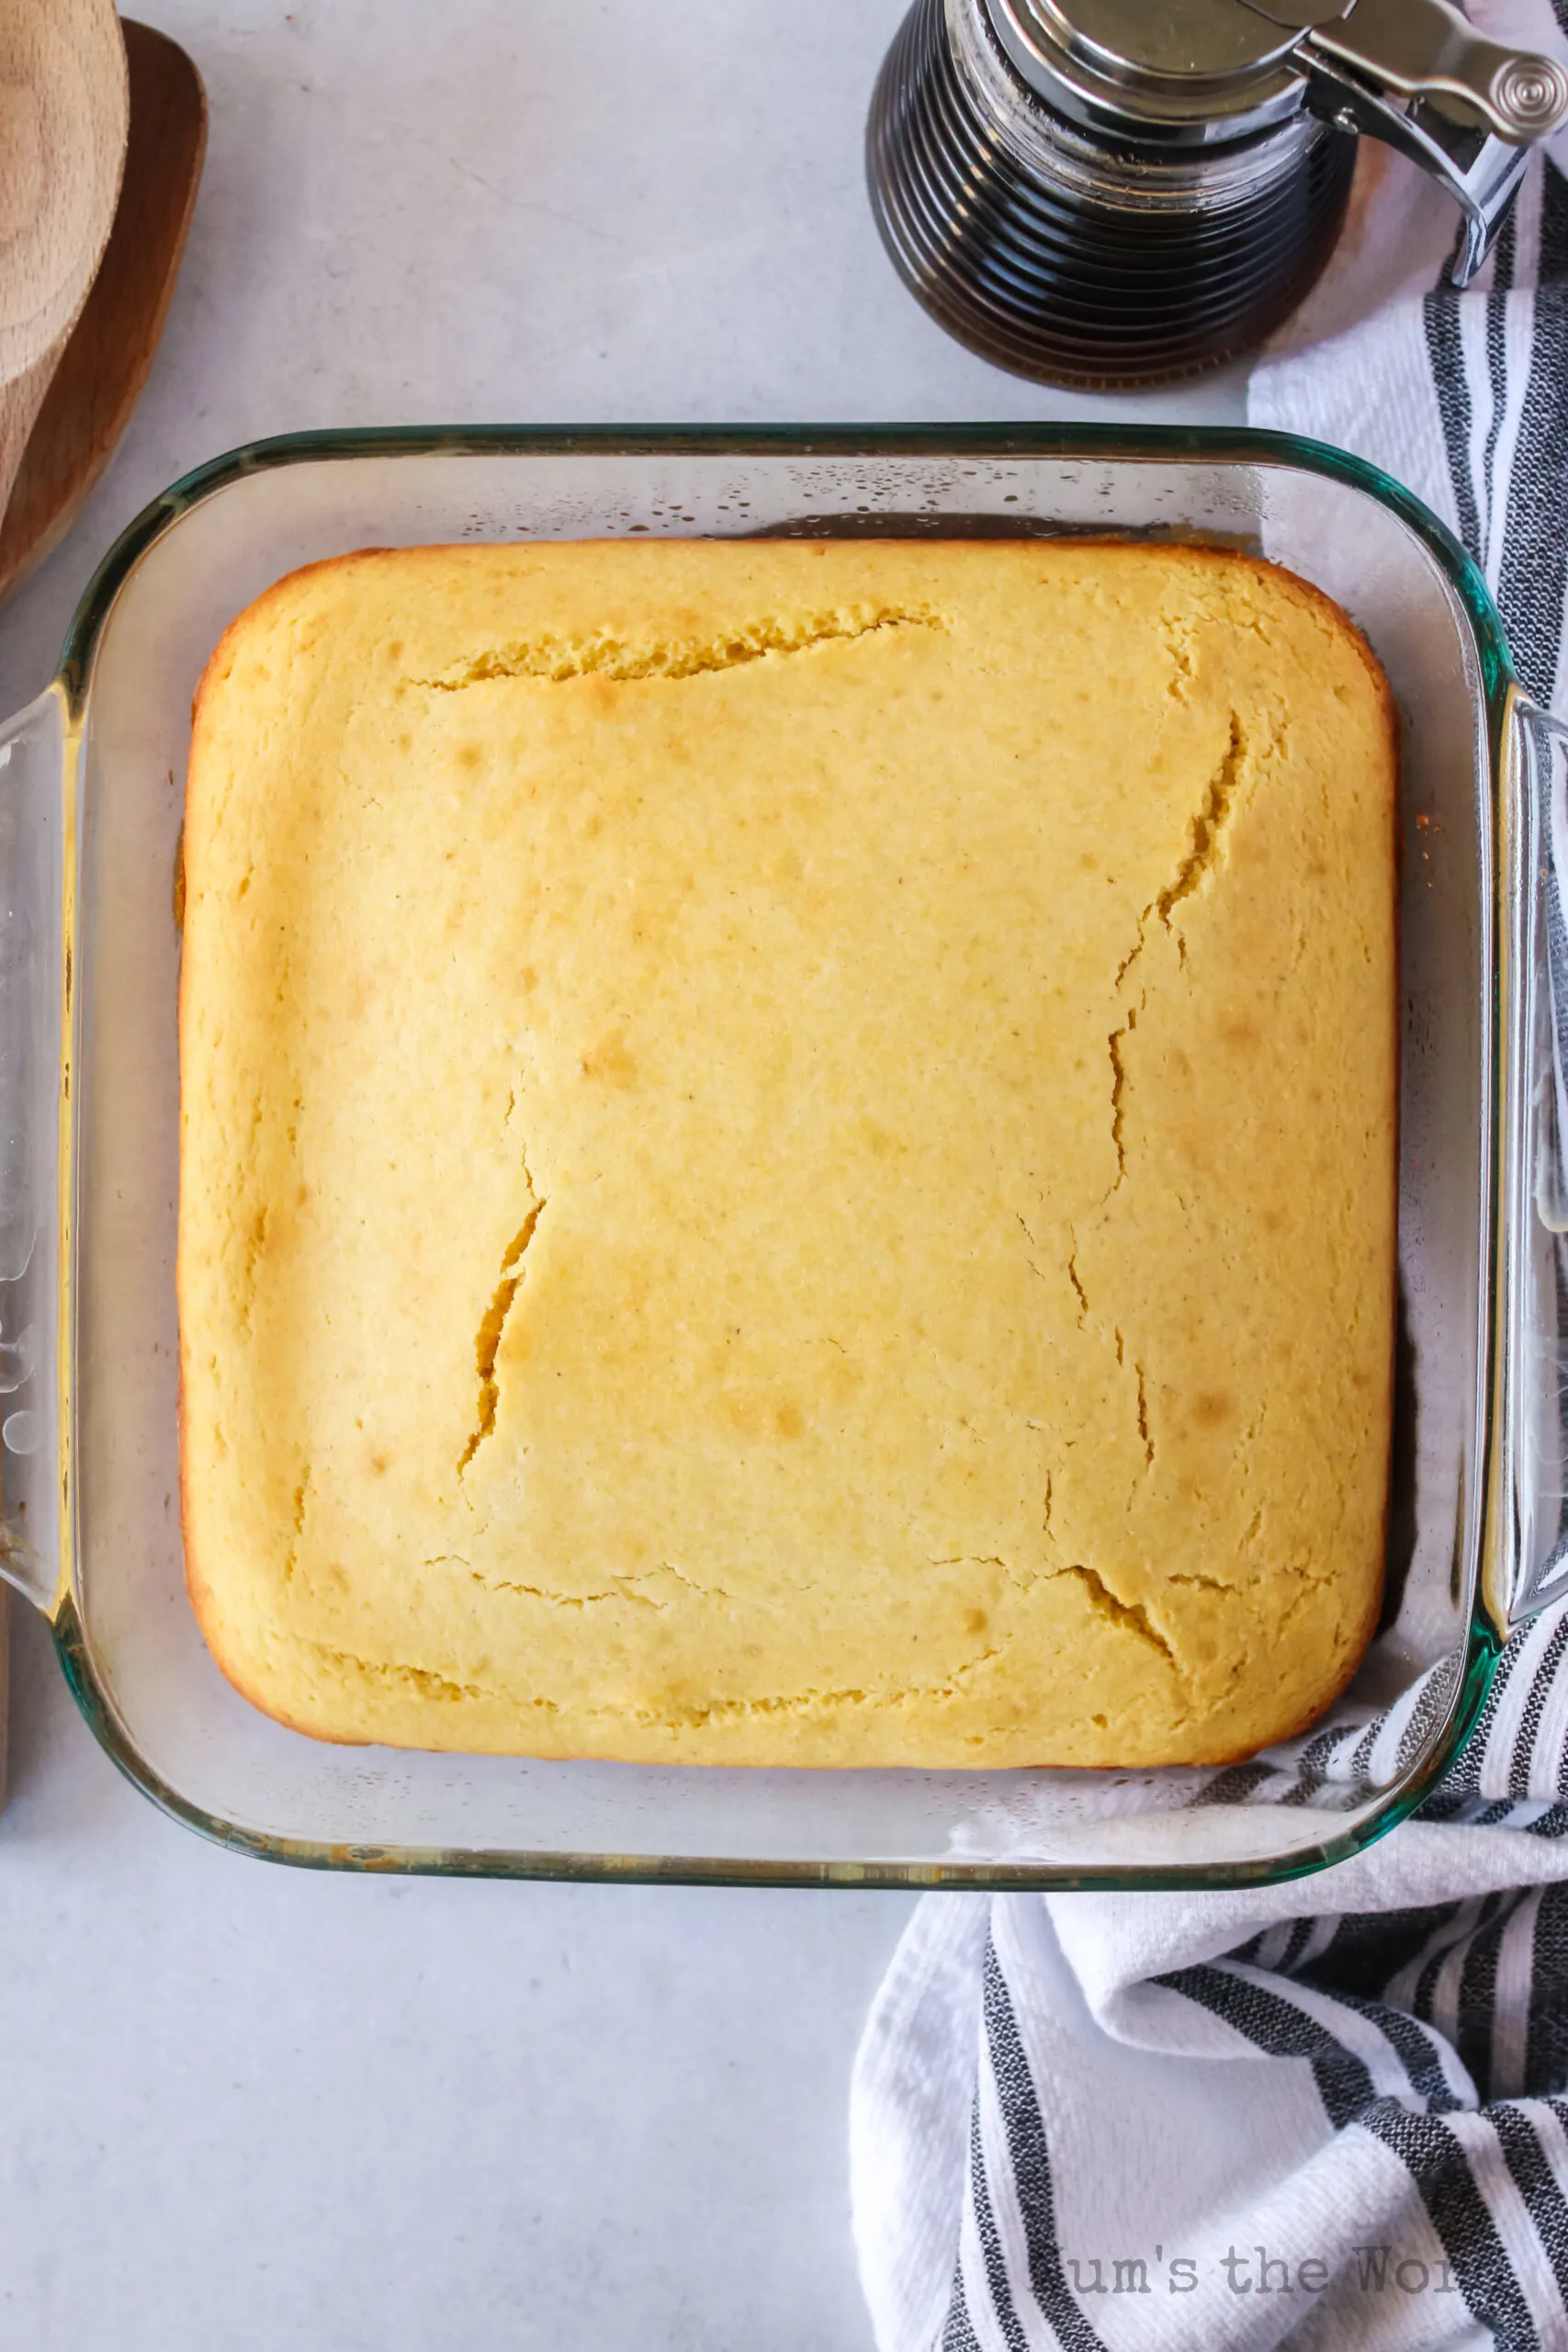 baked cornbread fresh from the oven.